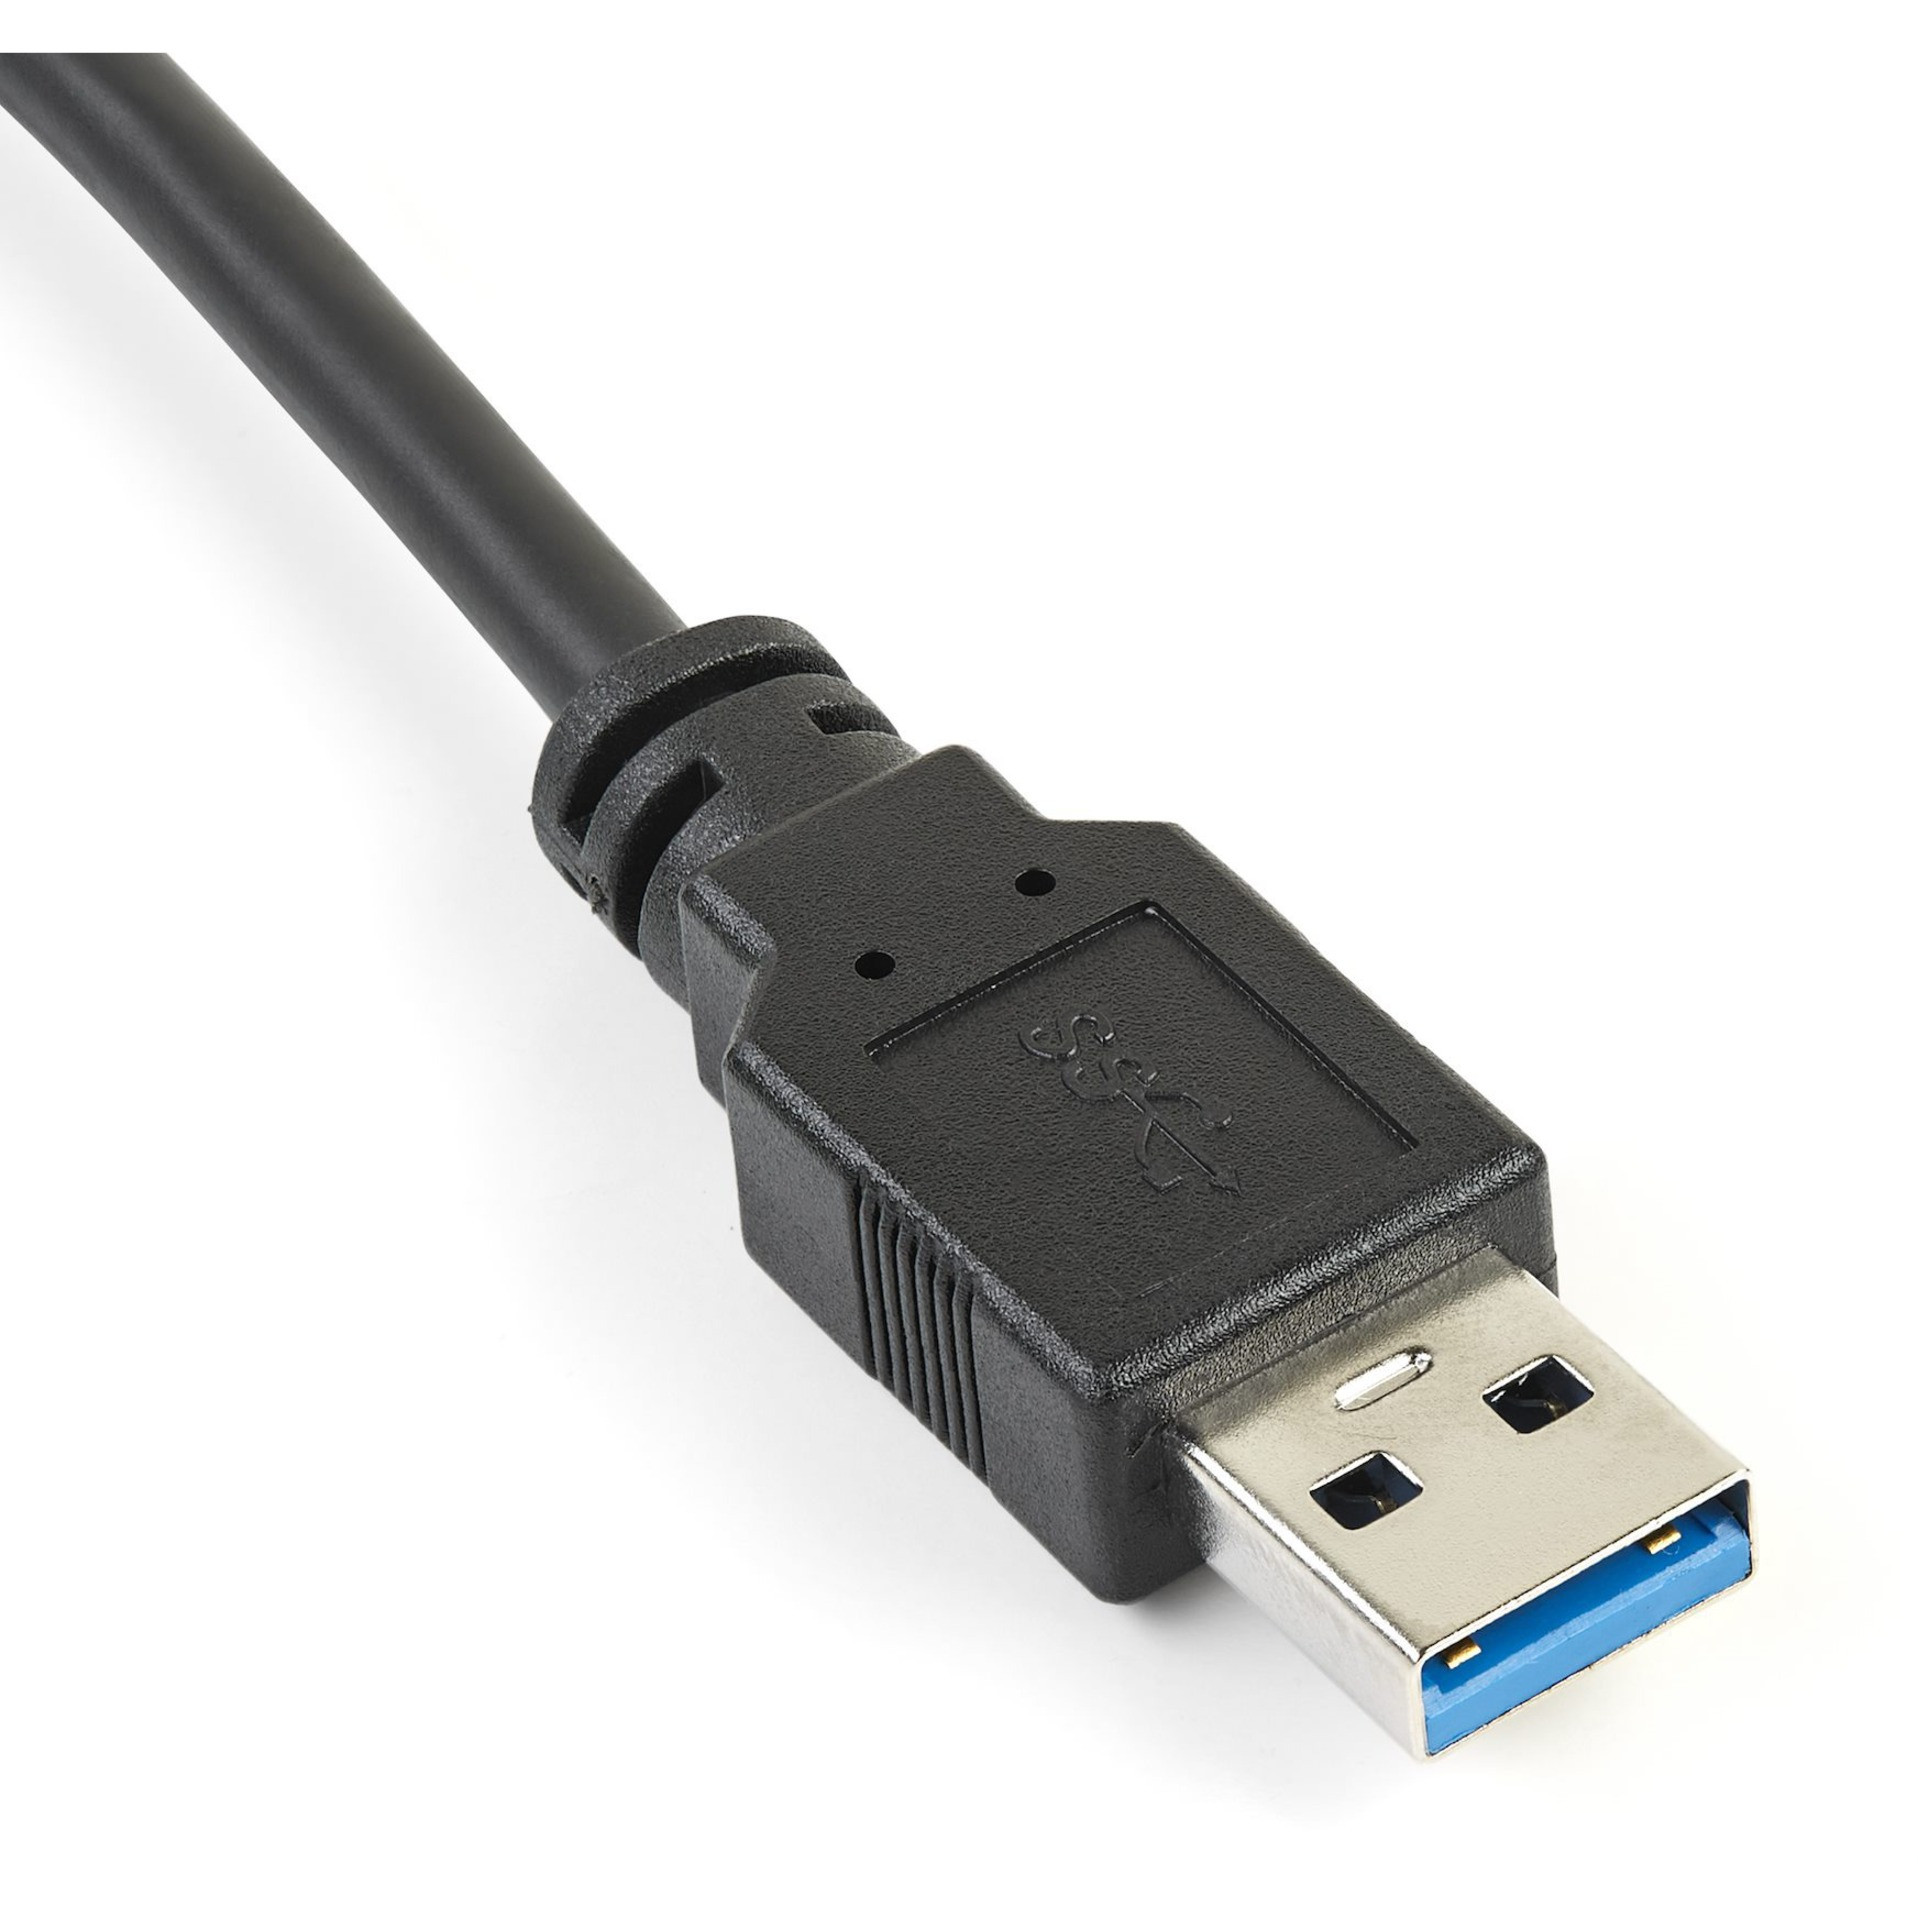 Startech .com USB 3.0 to VGA Video Adapter with On-board Driver Installation1920x1200Add a secondary VGA display to your USB 3.0 USB32VGAV - Corporate Armor